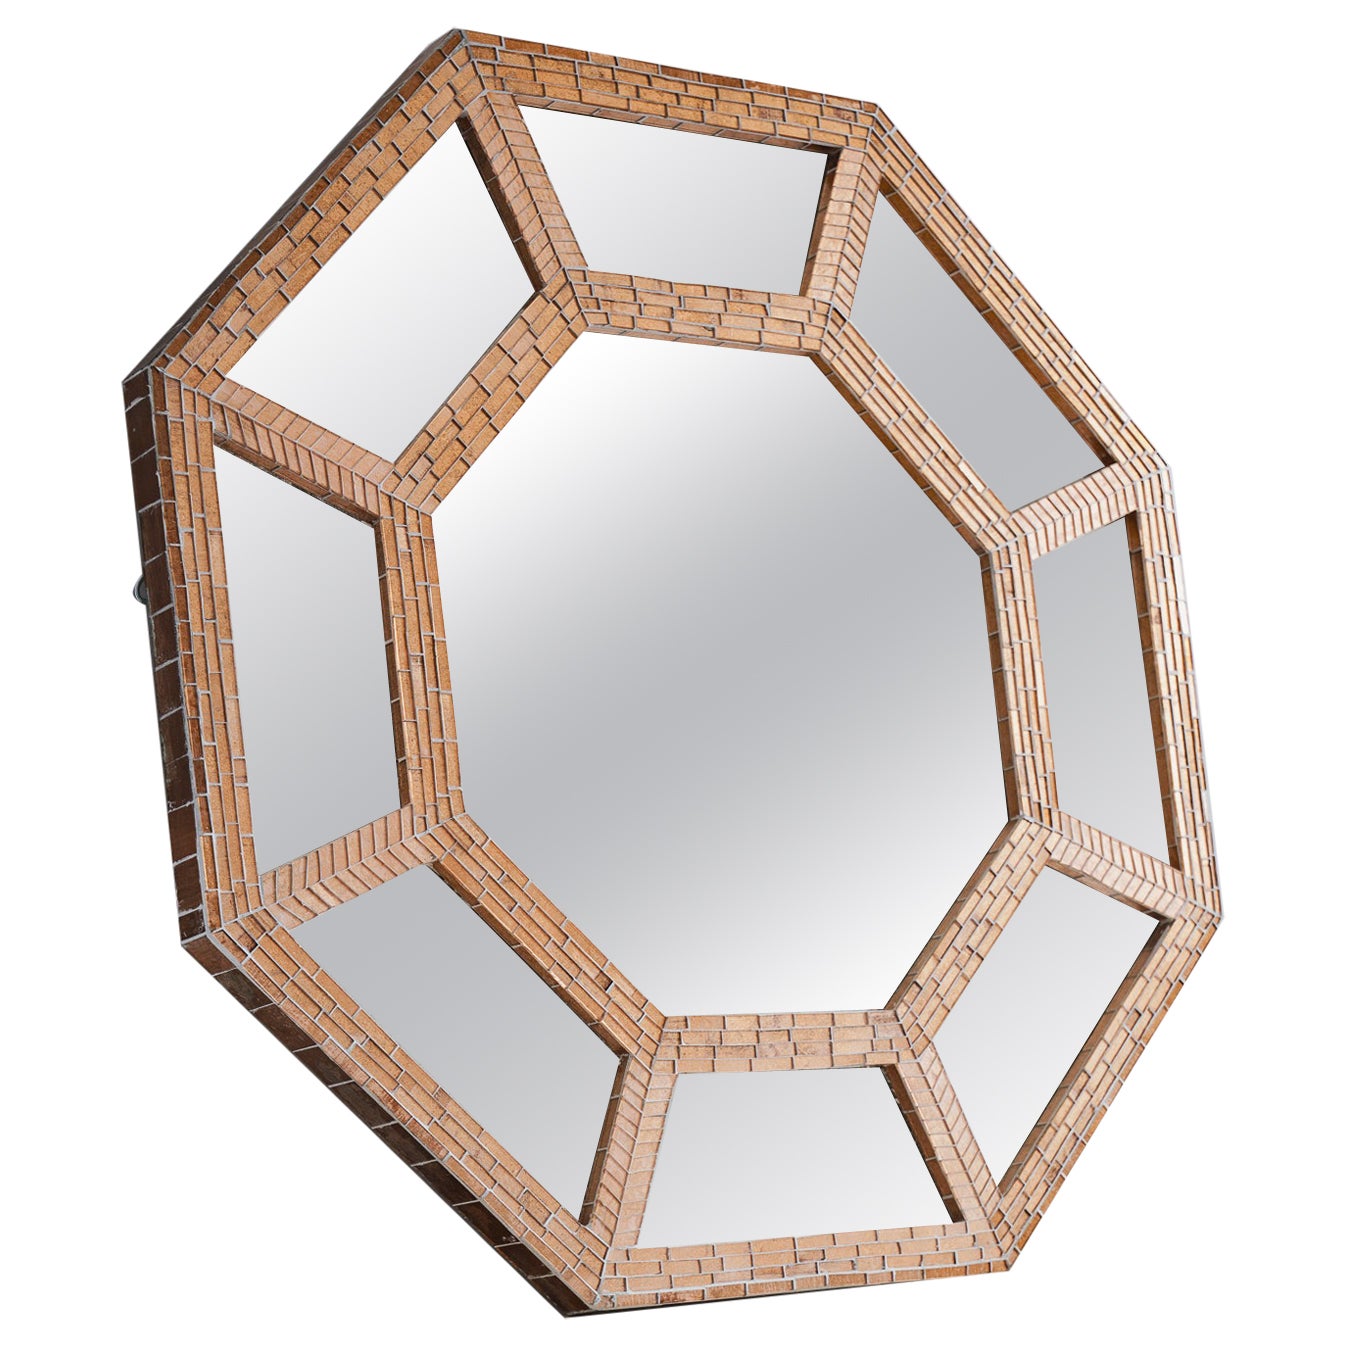 Octagonal Ventana Mosaic Mirror, Handmade in UK by Claire Nayman For Sale